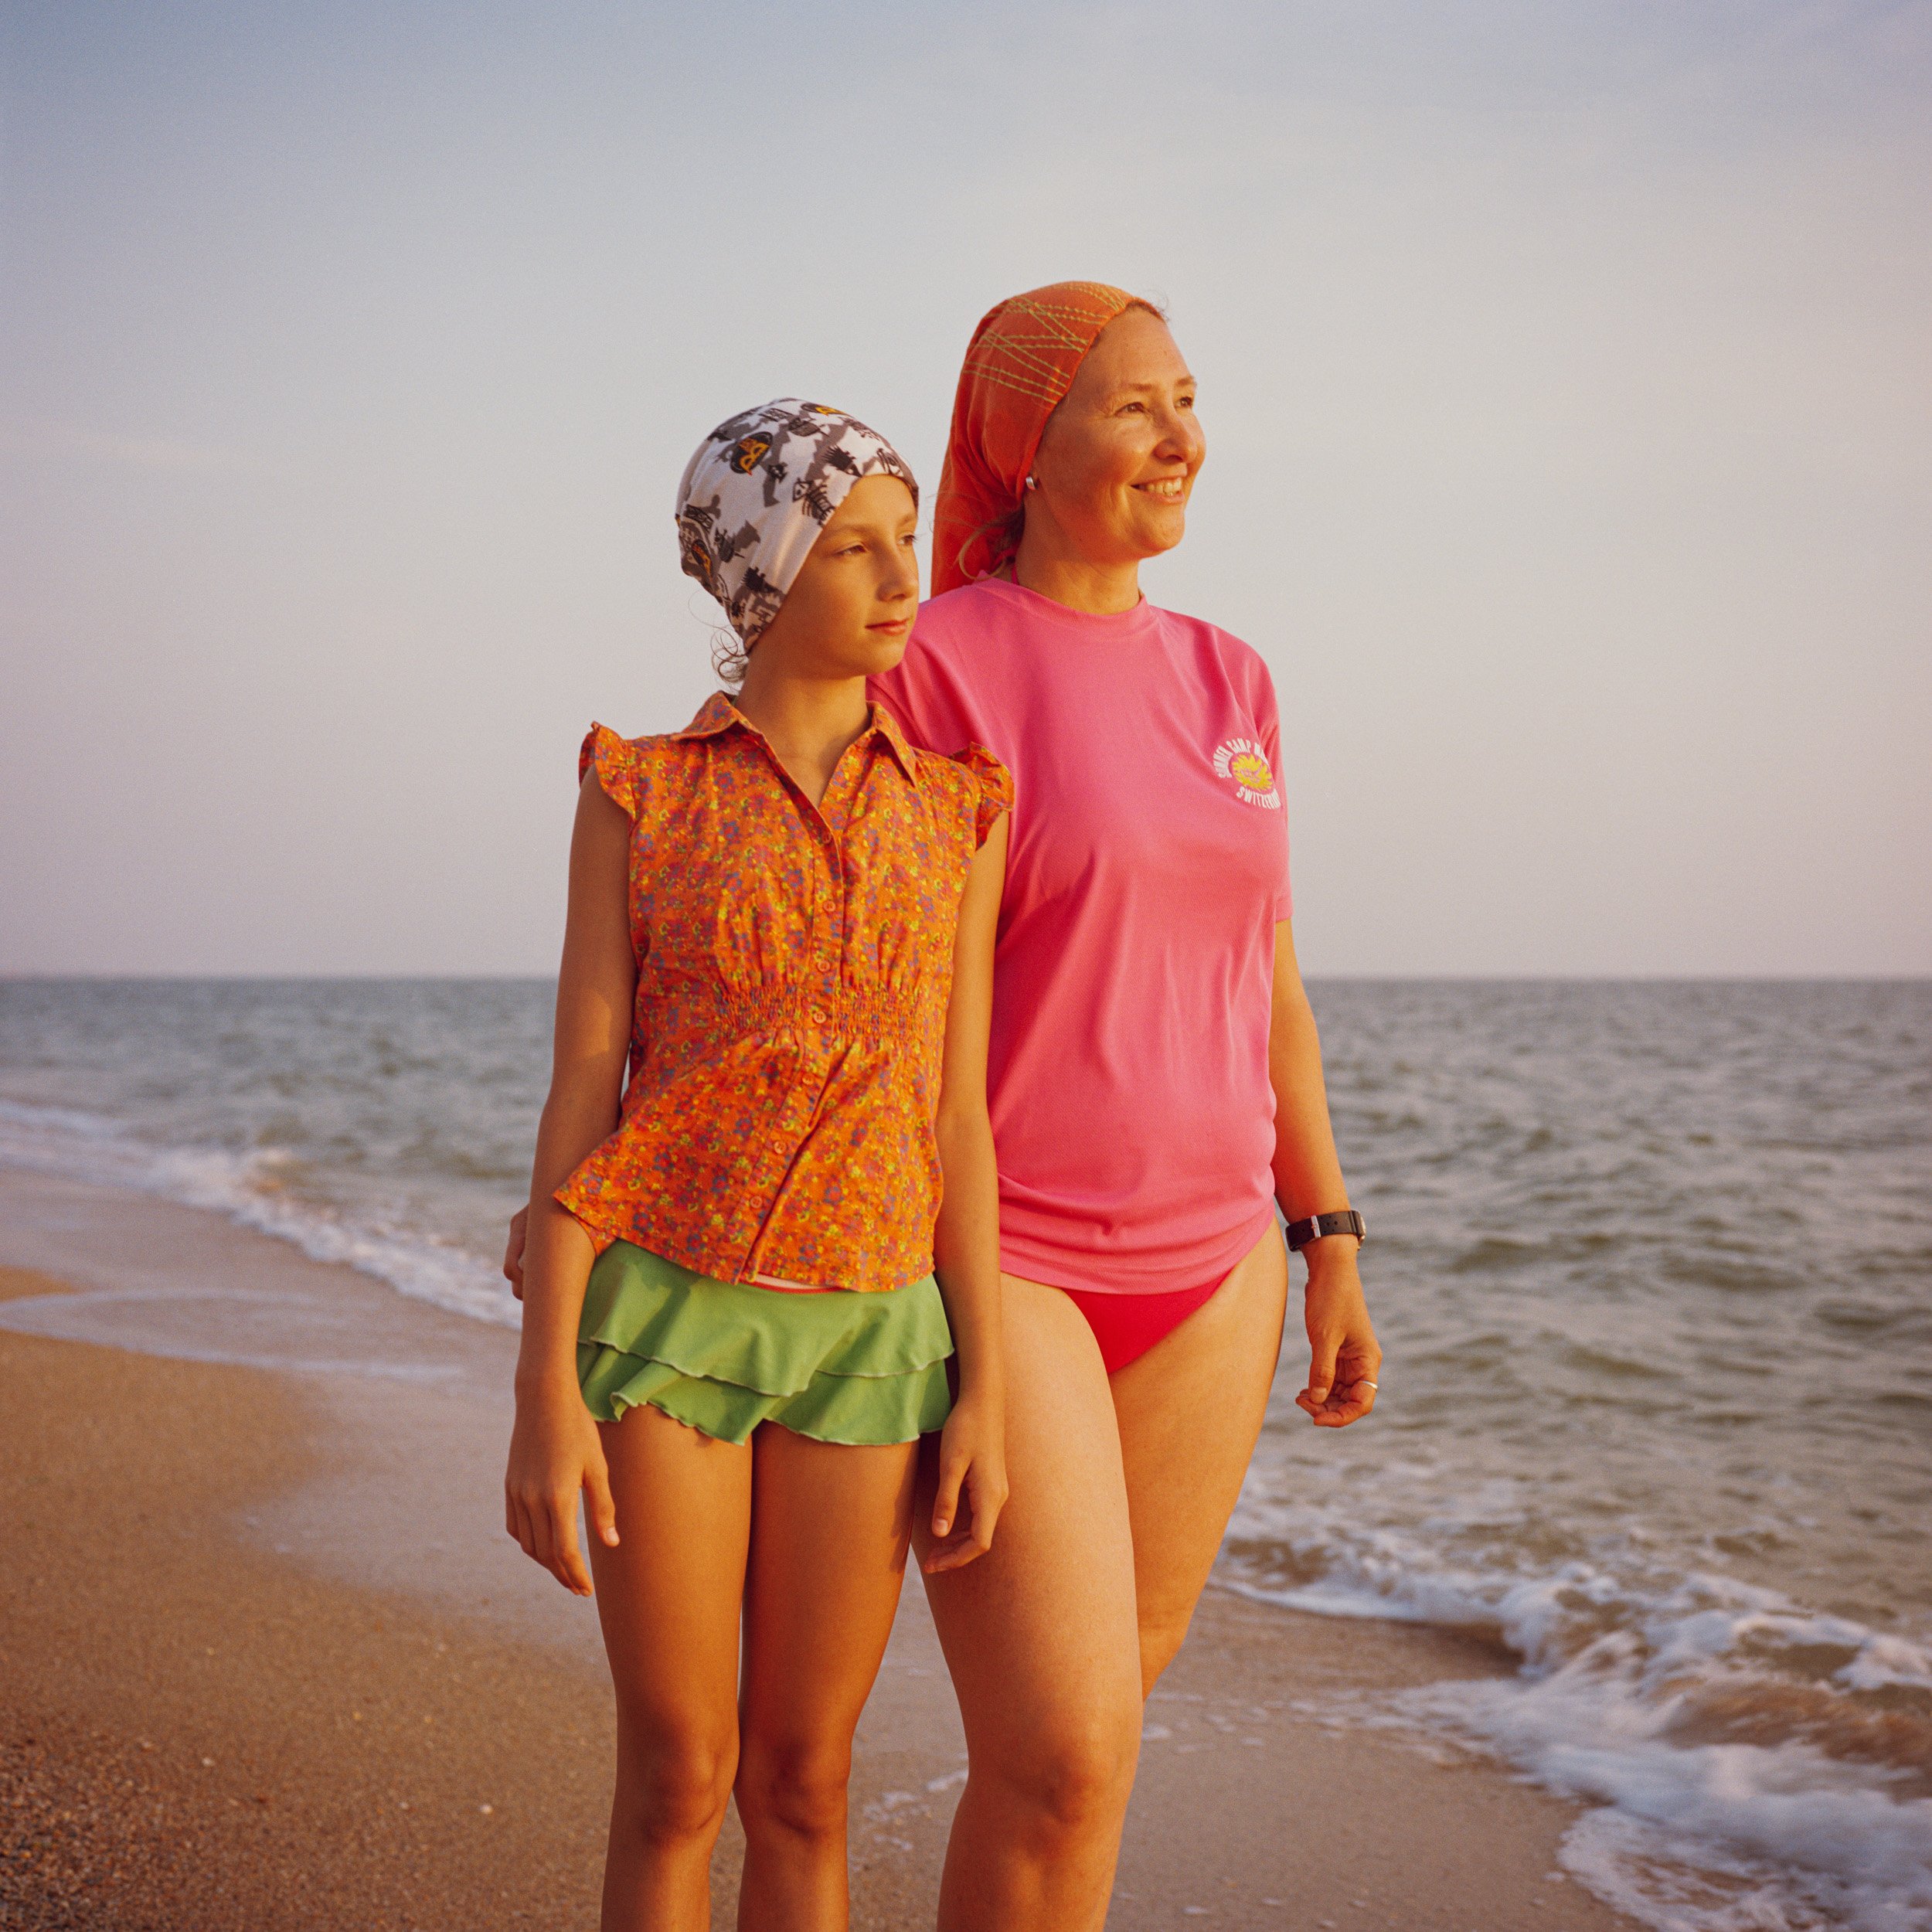  July 2019. Dolzhanskaya spit, Krasnodar Krai, Russia. Russian mother and daughter on holiday on the Sea of Azov. 